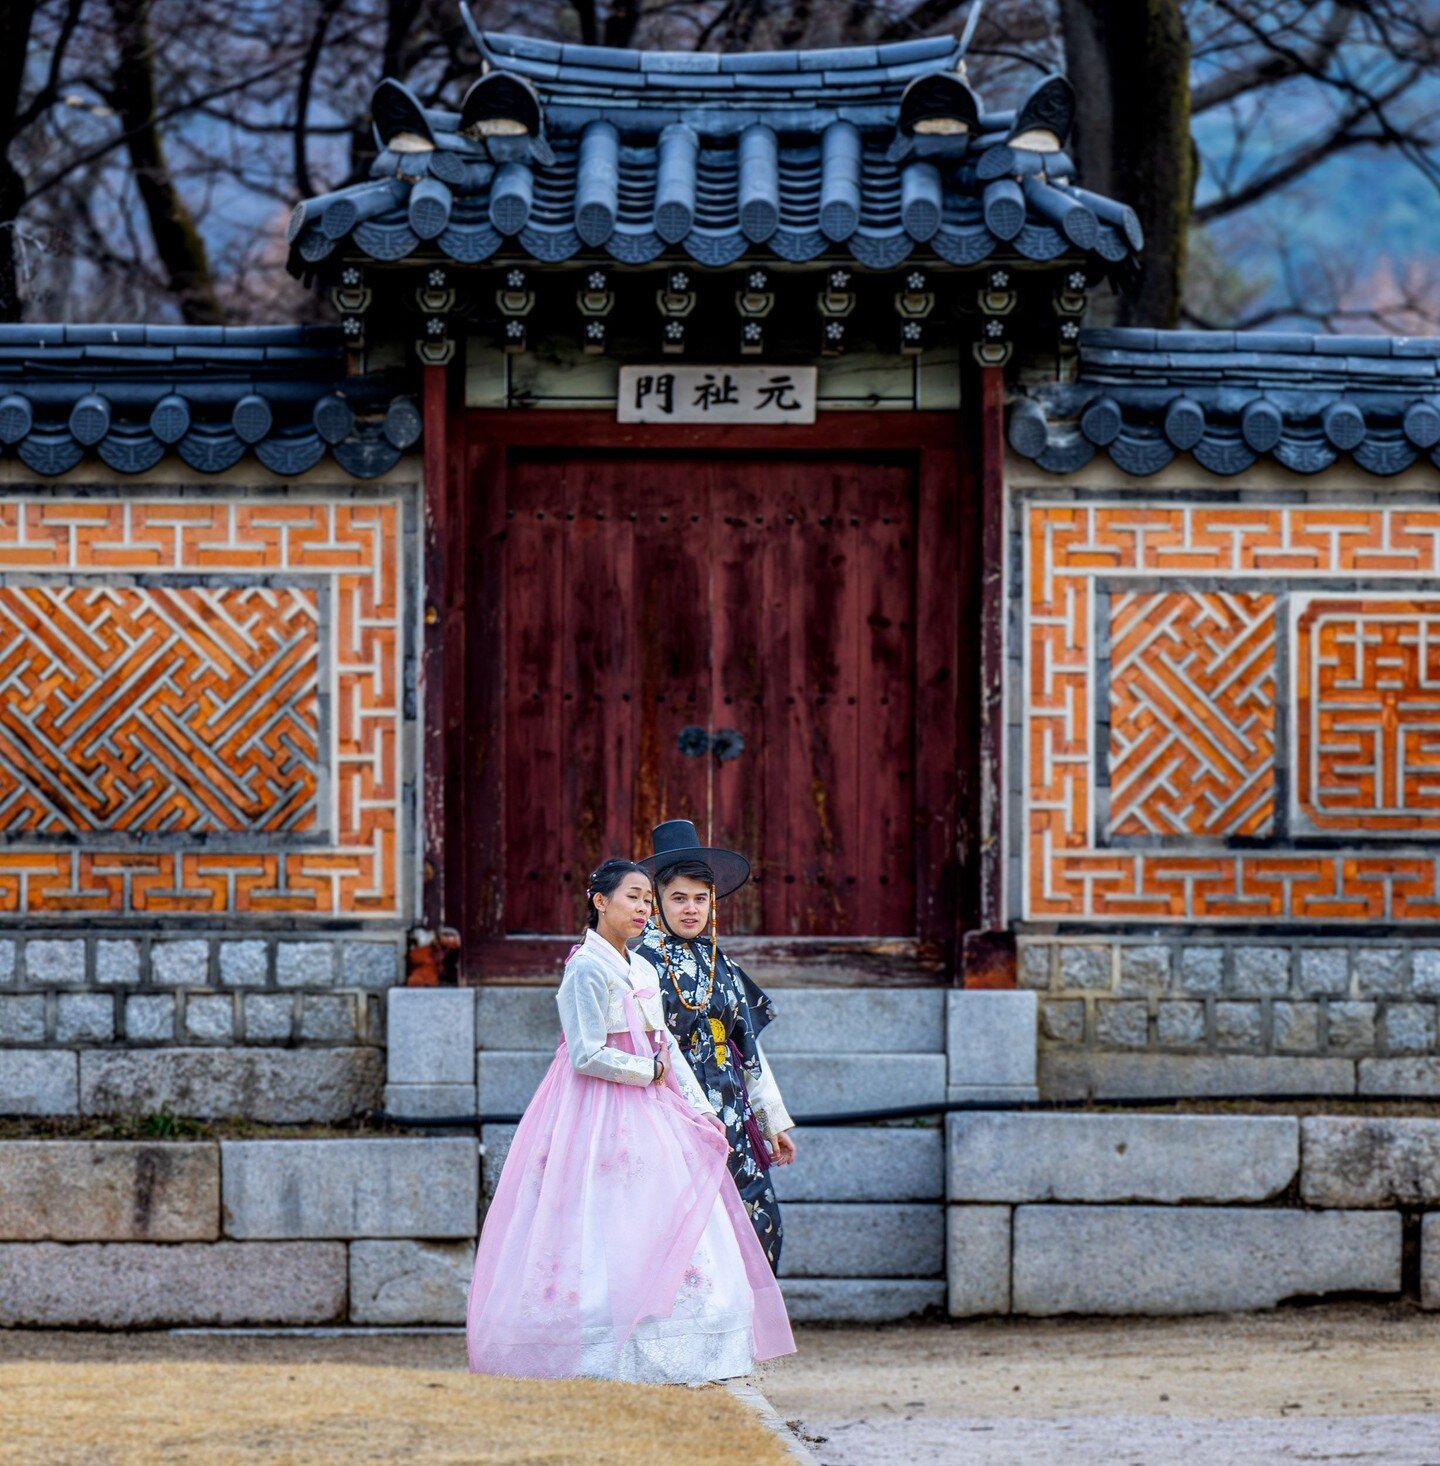 A couple in traditional Korean #hanbok outfits at the #Gyeongbokgung palace